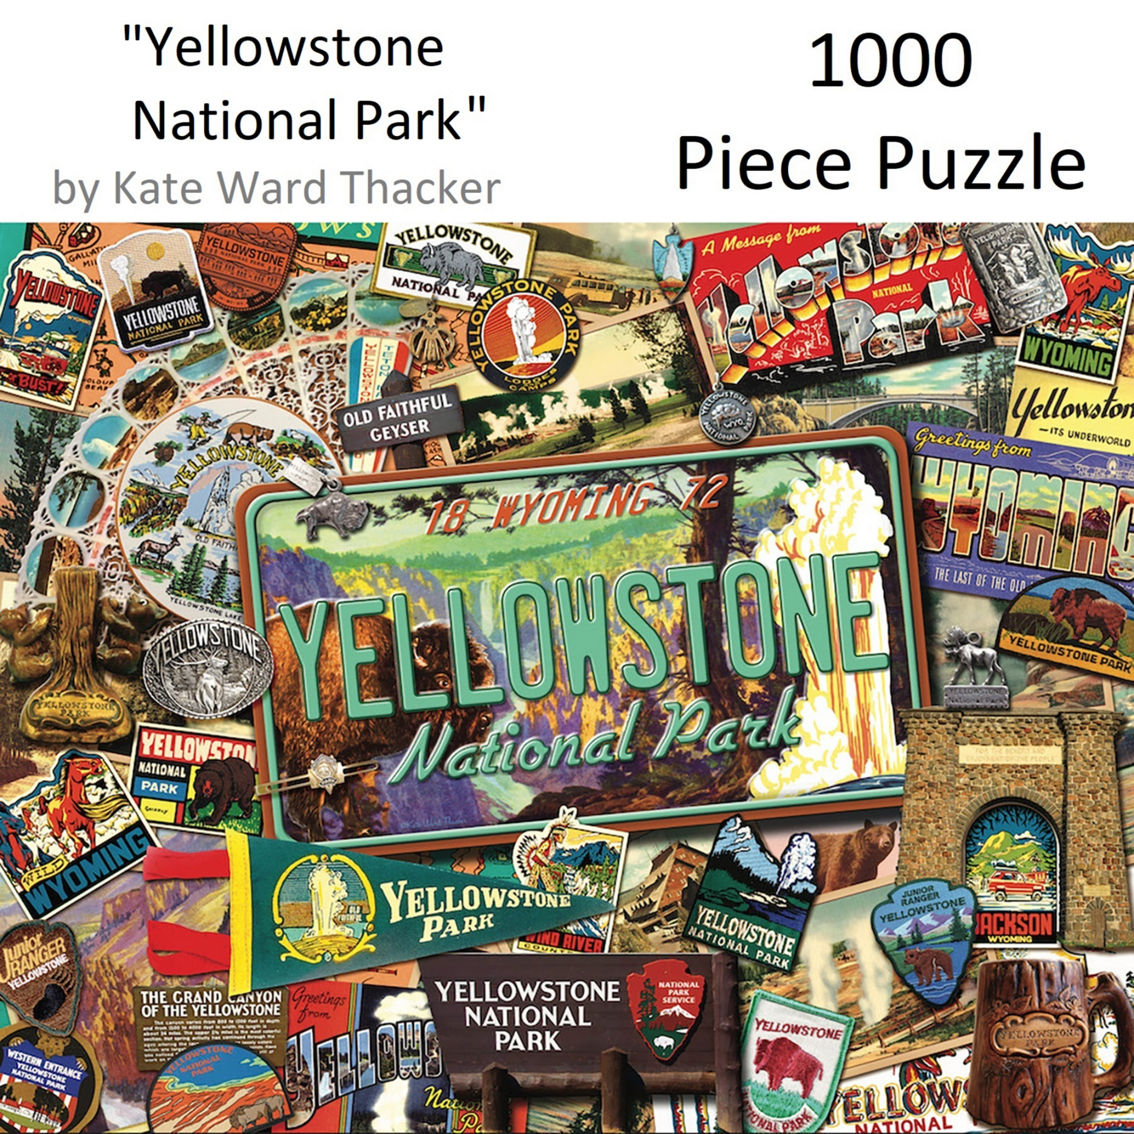 Hart Puzzles Yellowstone National Park 1000 pc. Puzzle - Image 4 of 6